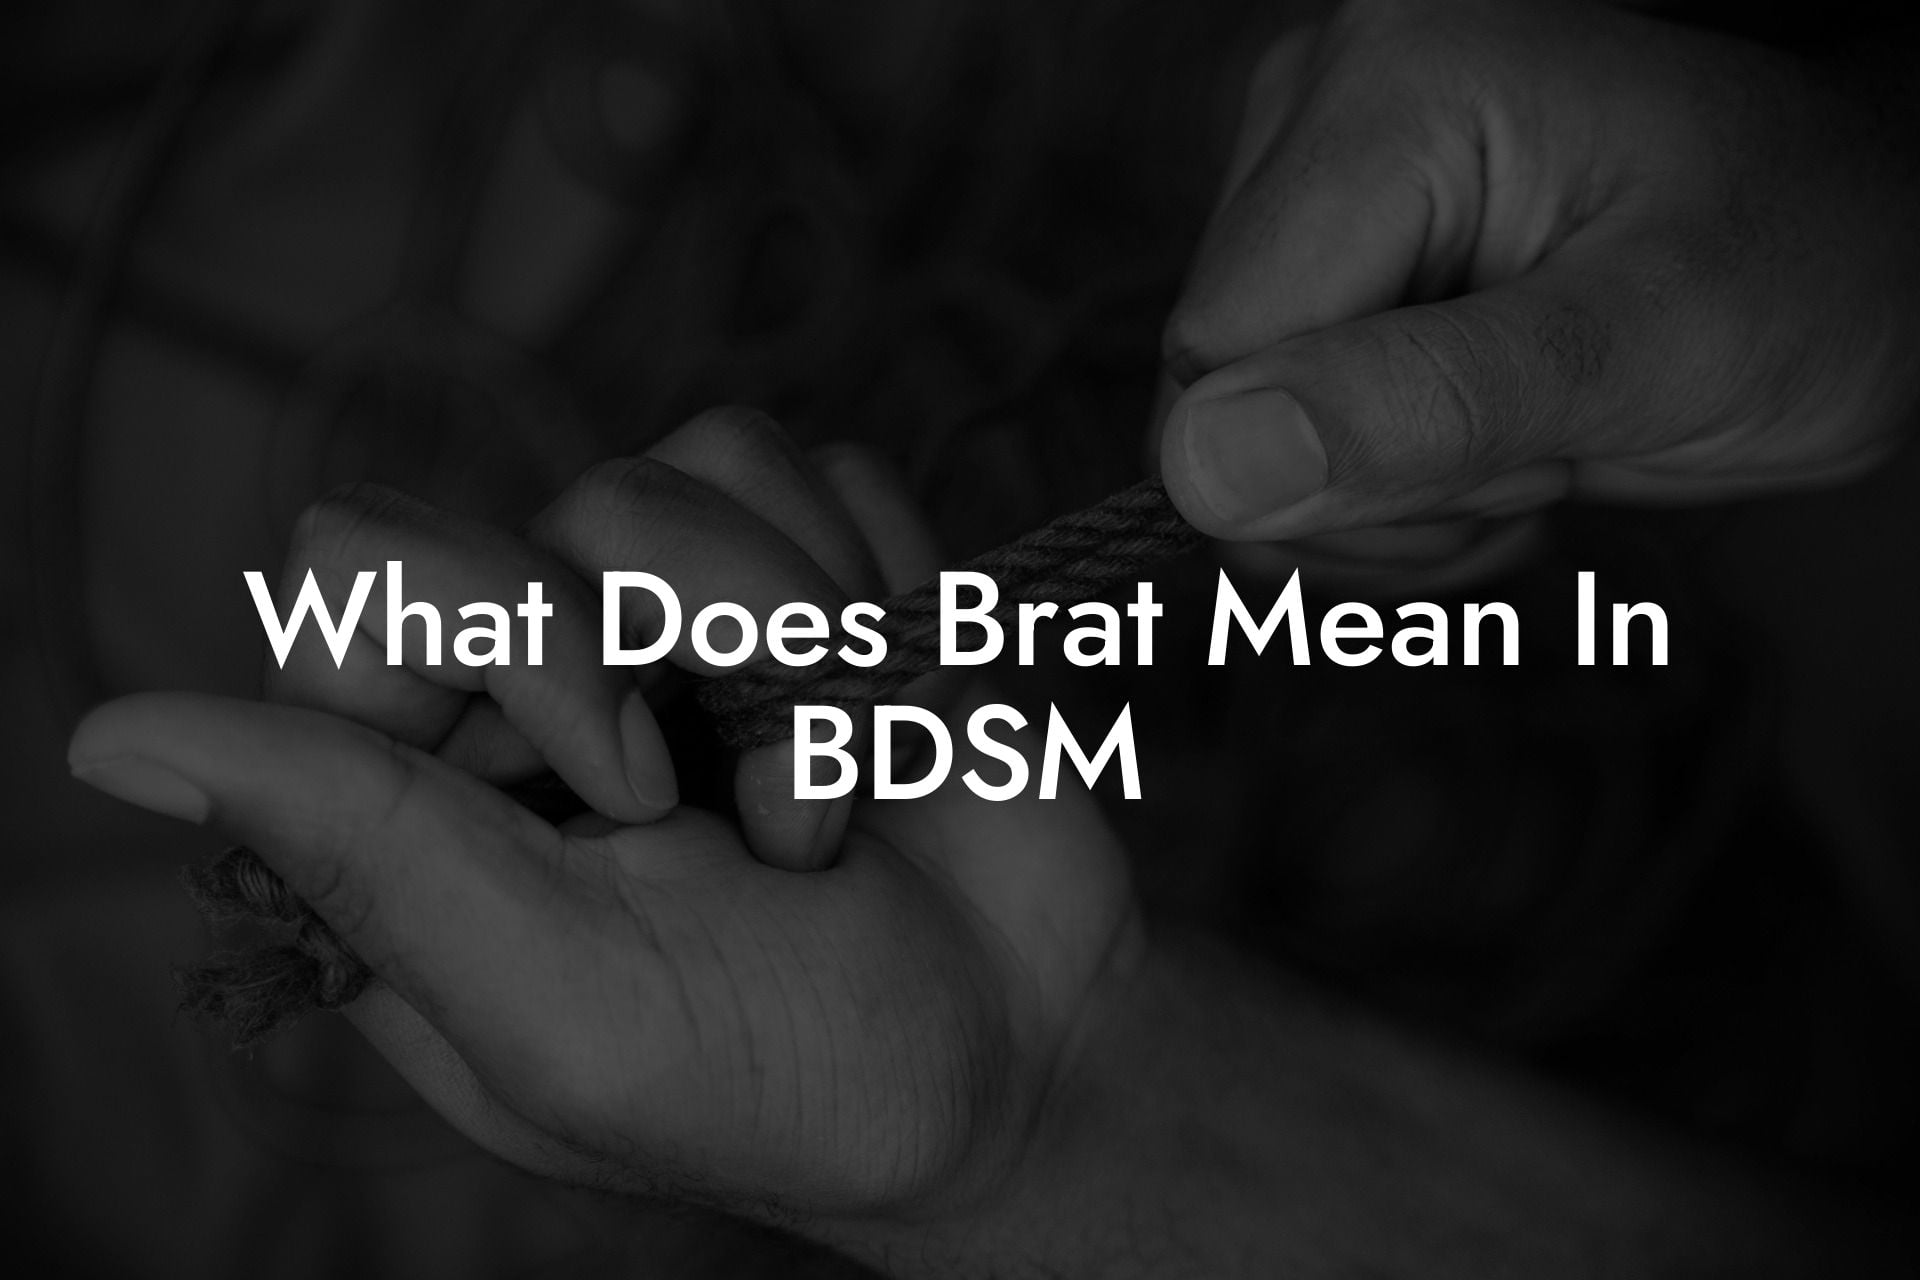 What Does Brat Mean In BDSM